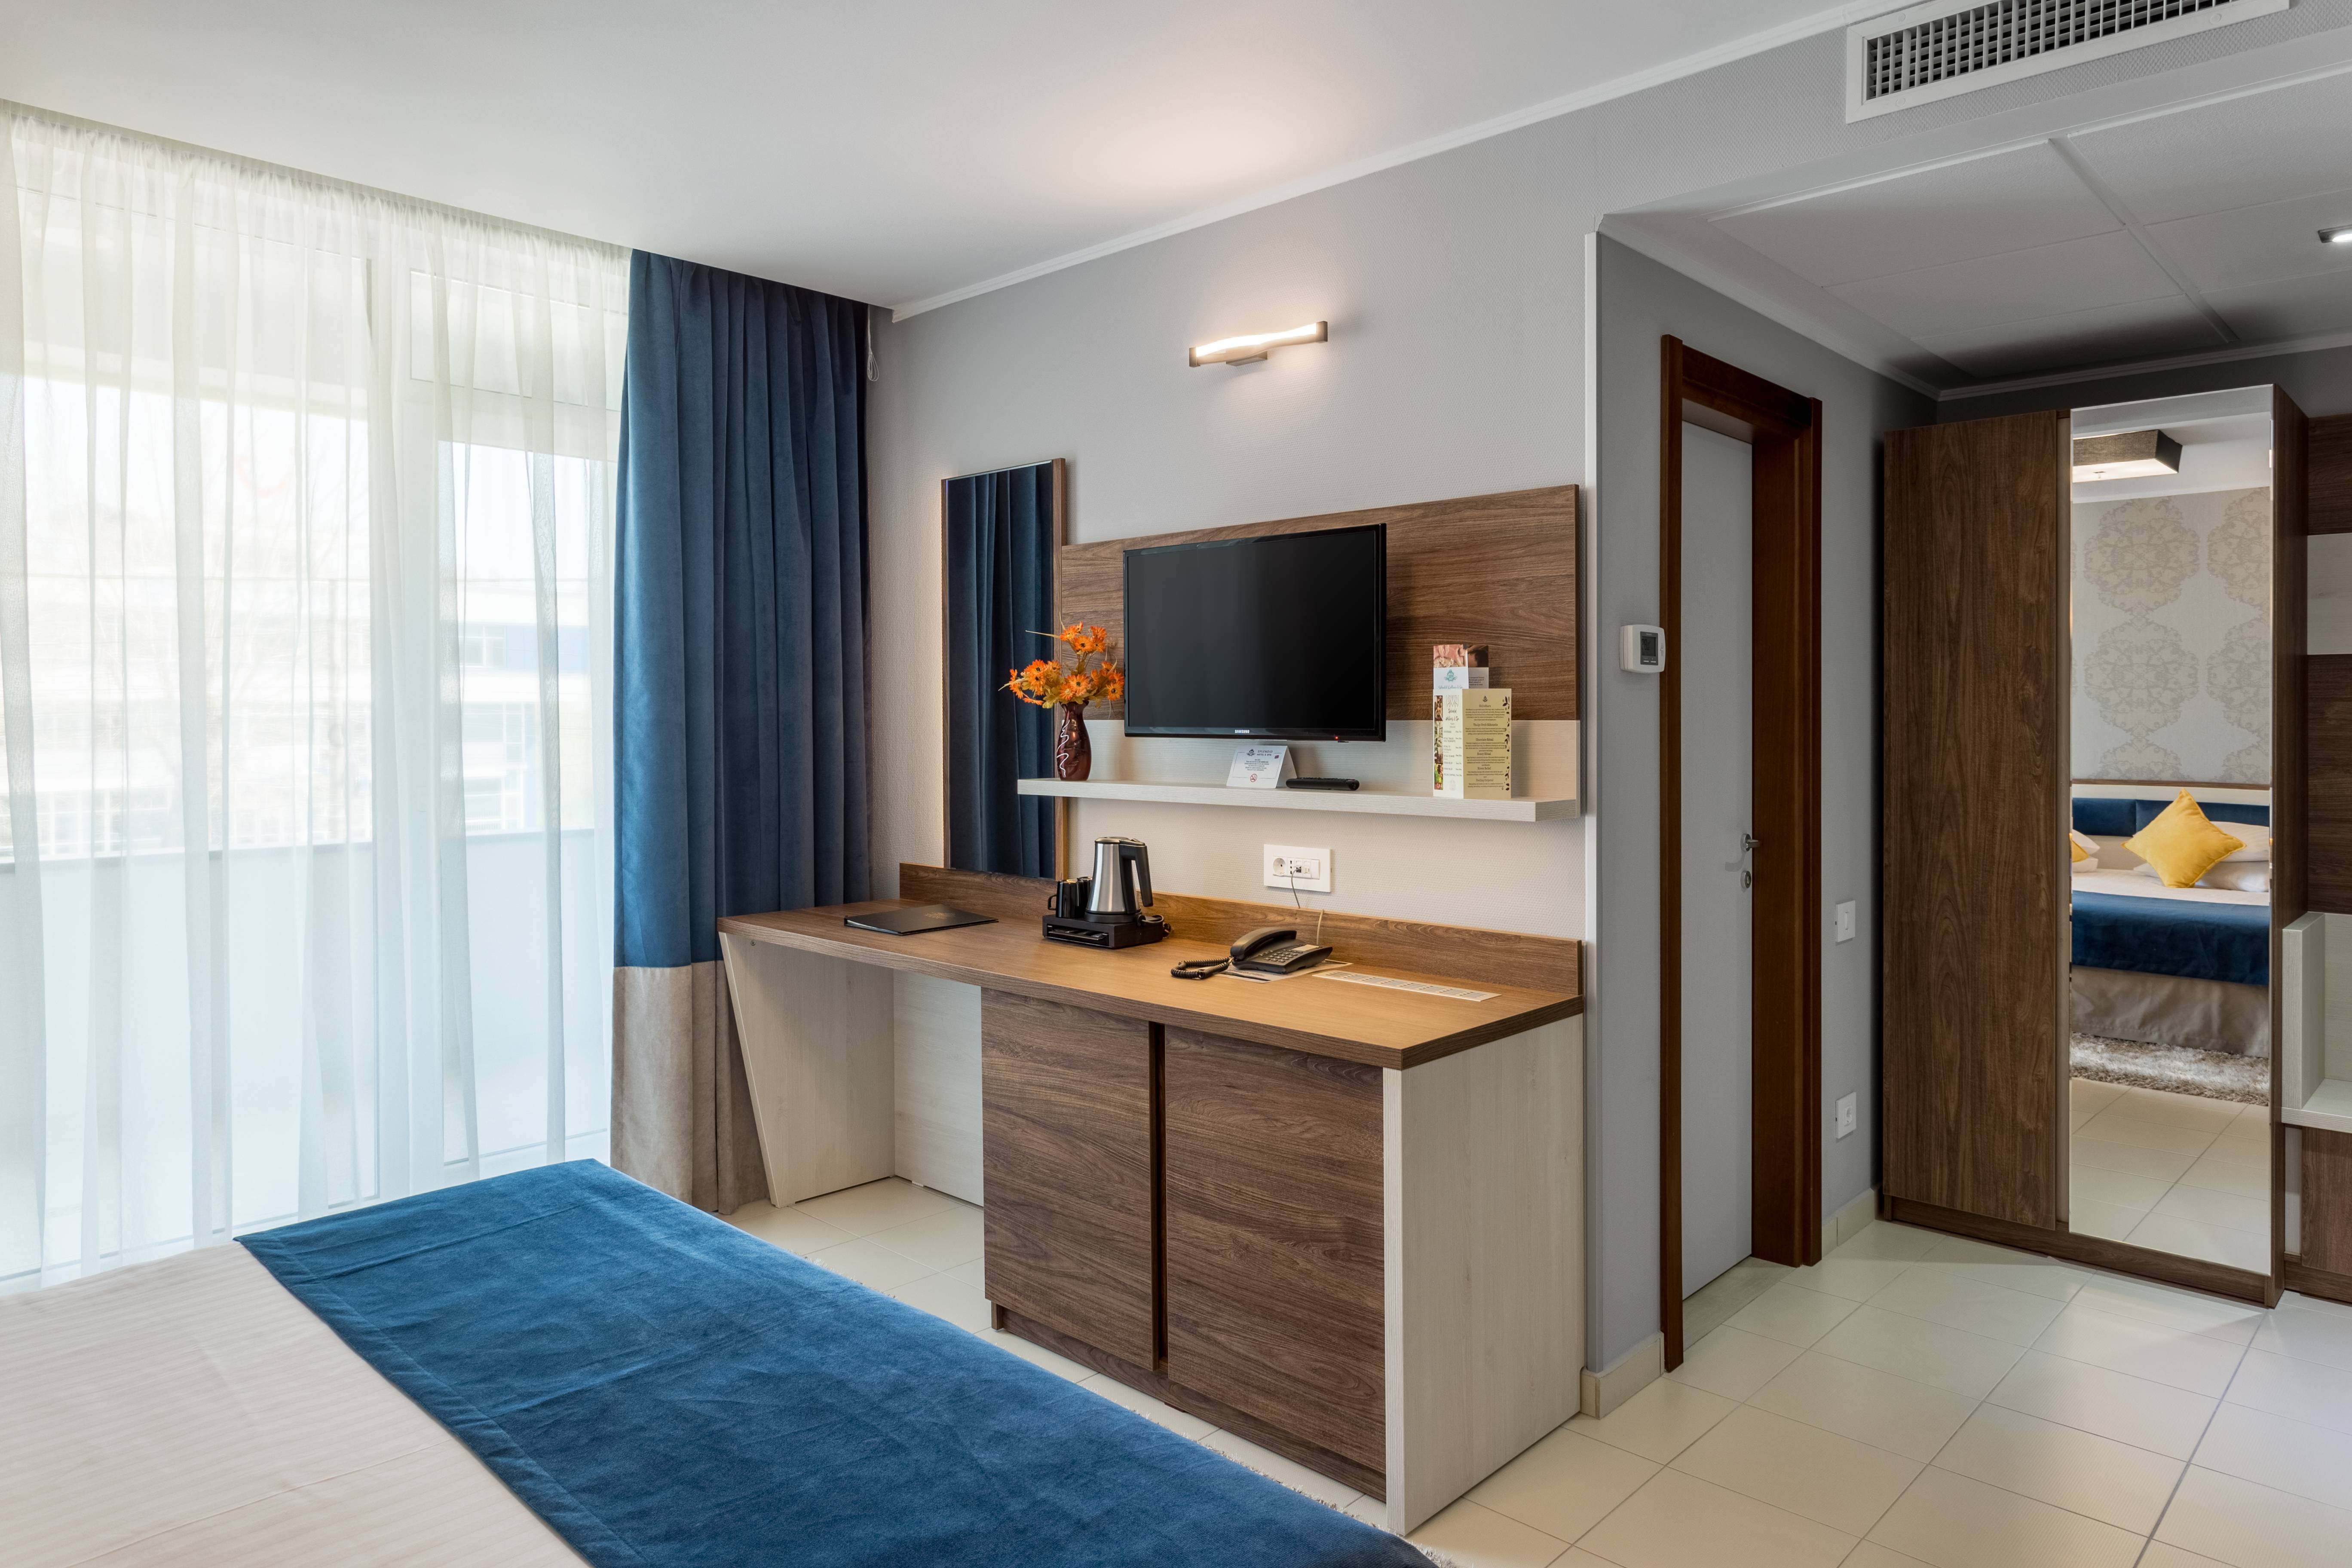 Litoral 2022 Mamaia Splendid Hotel & SPA (Adults Only)****